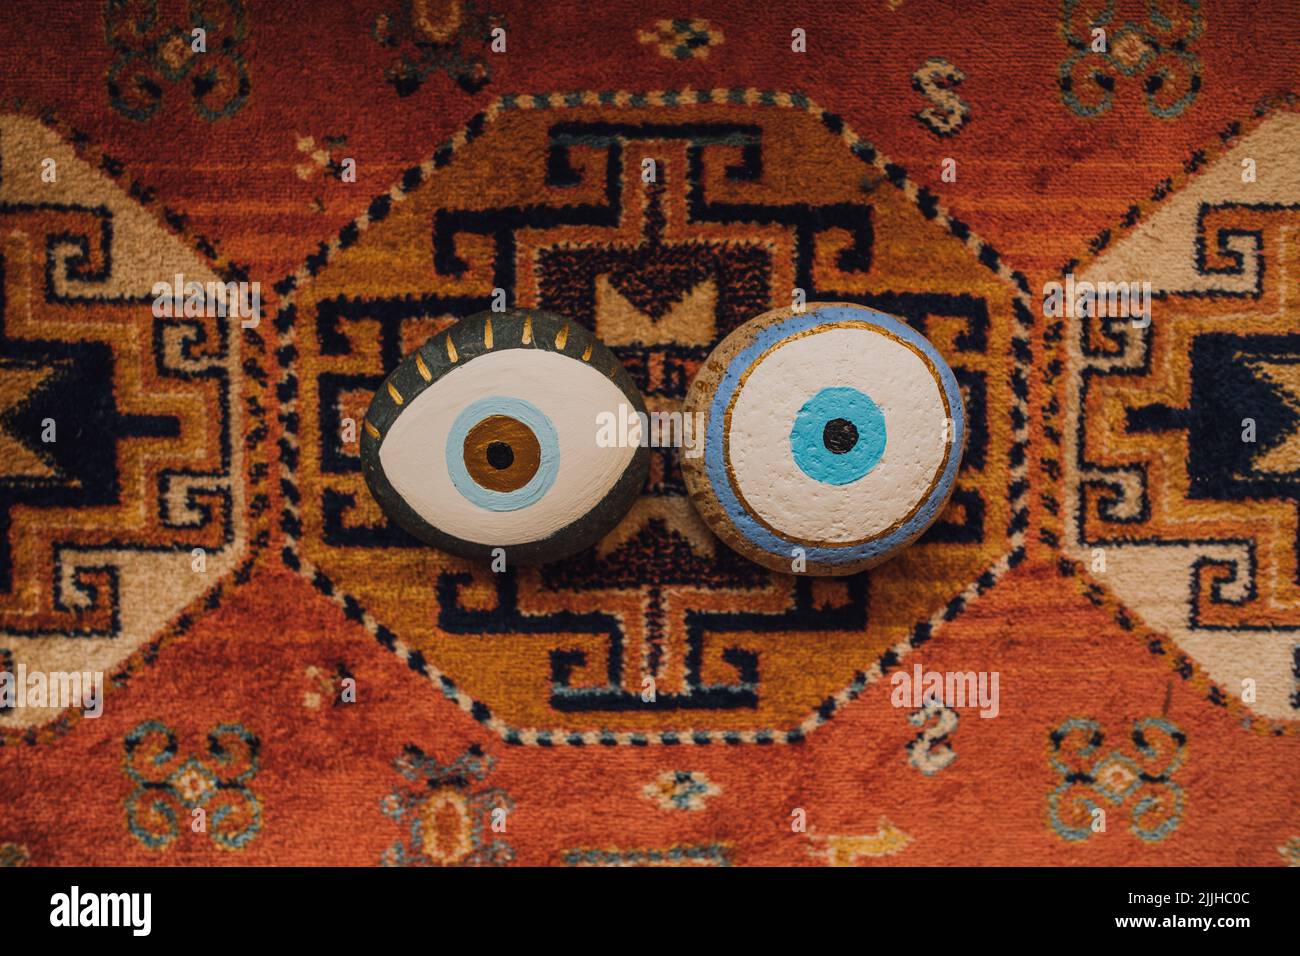 two painted evil eye rocks on patterned rug Stock Photo